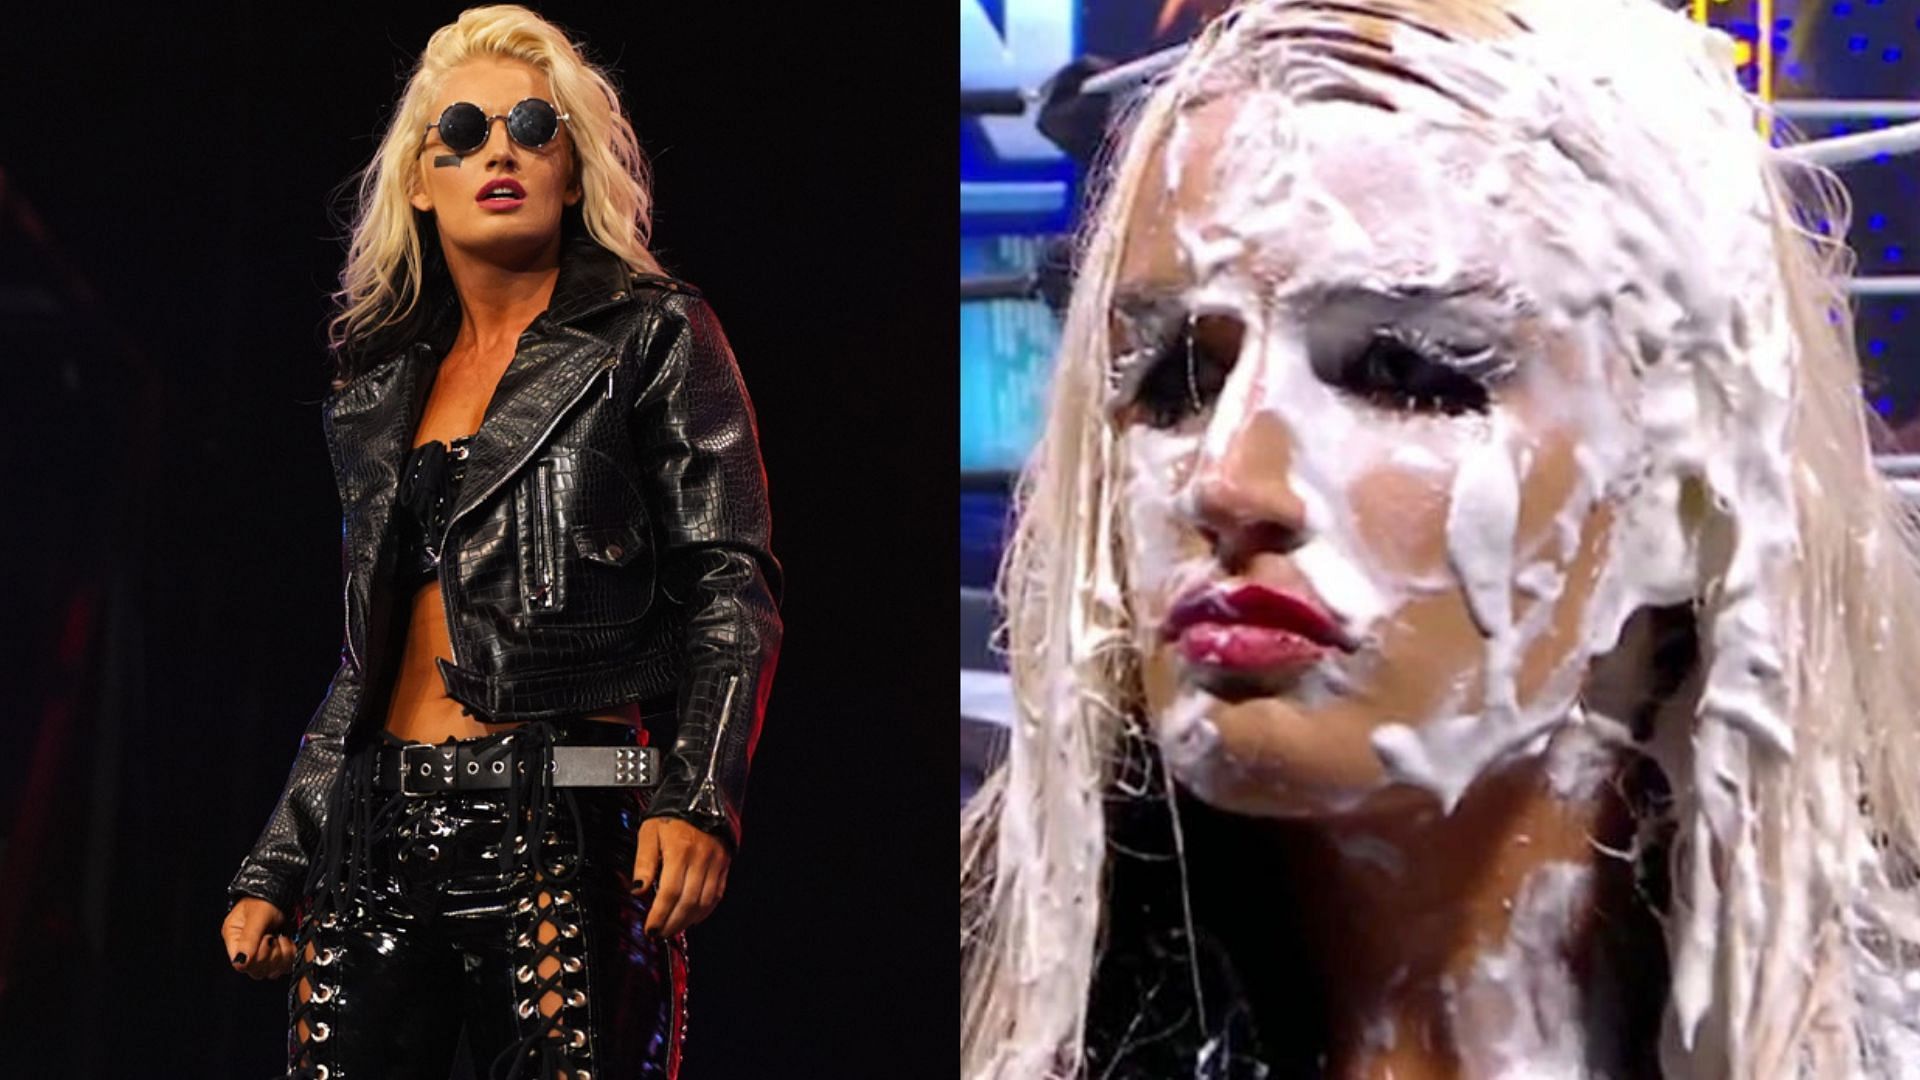 Toni Storm left WWE to sign with AEW